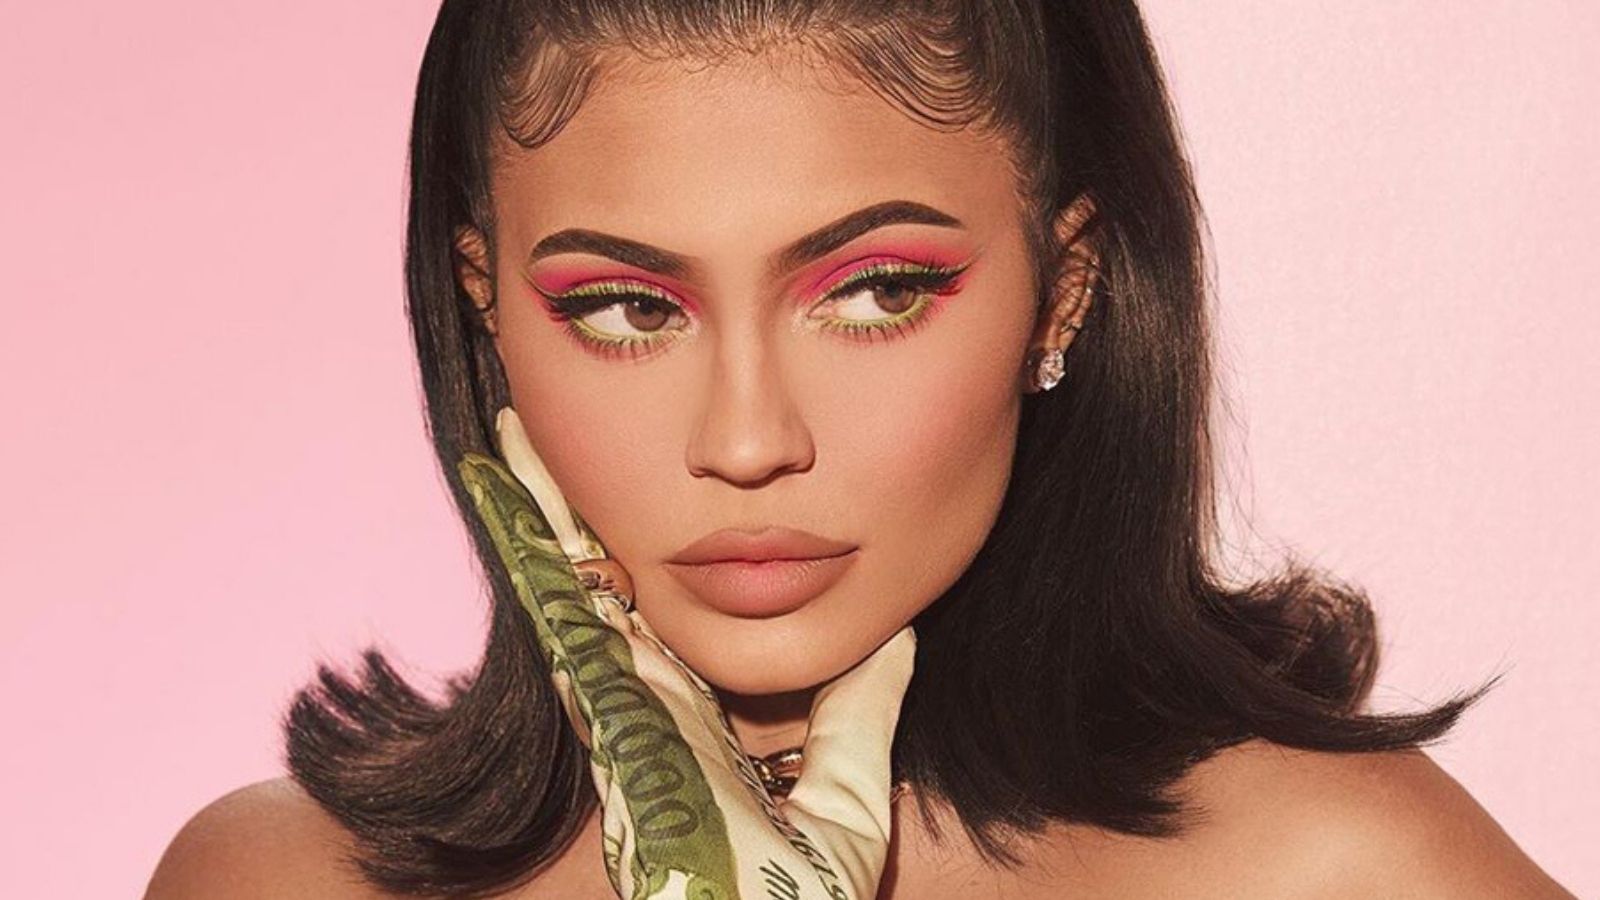 Kylie Jenner Reflects on Launching Kylie Cosmetics: ‘It’s Weird That This Is My Life Now’